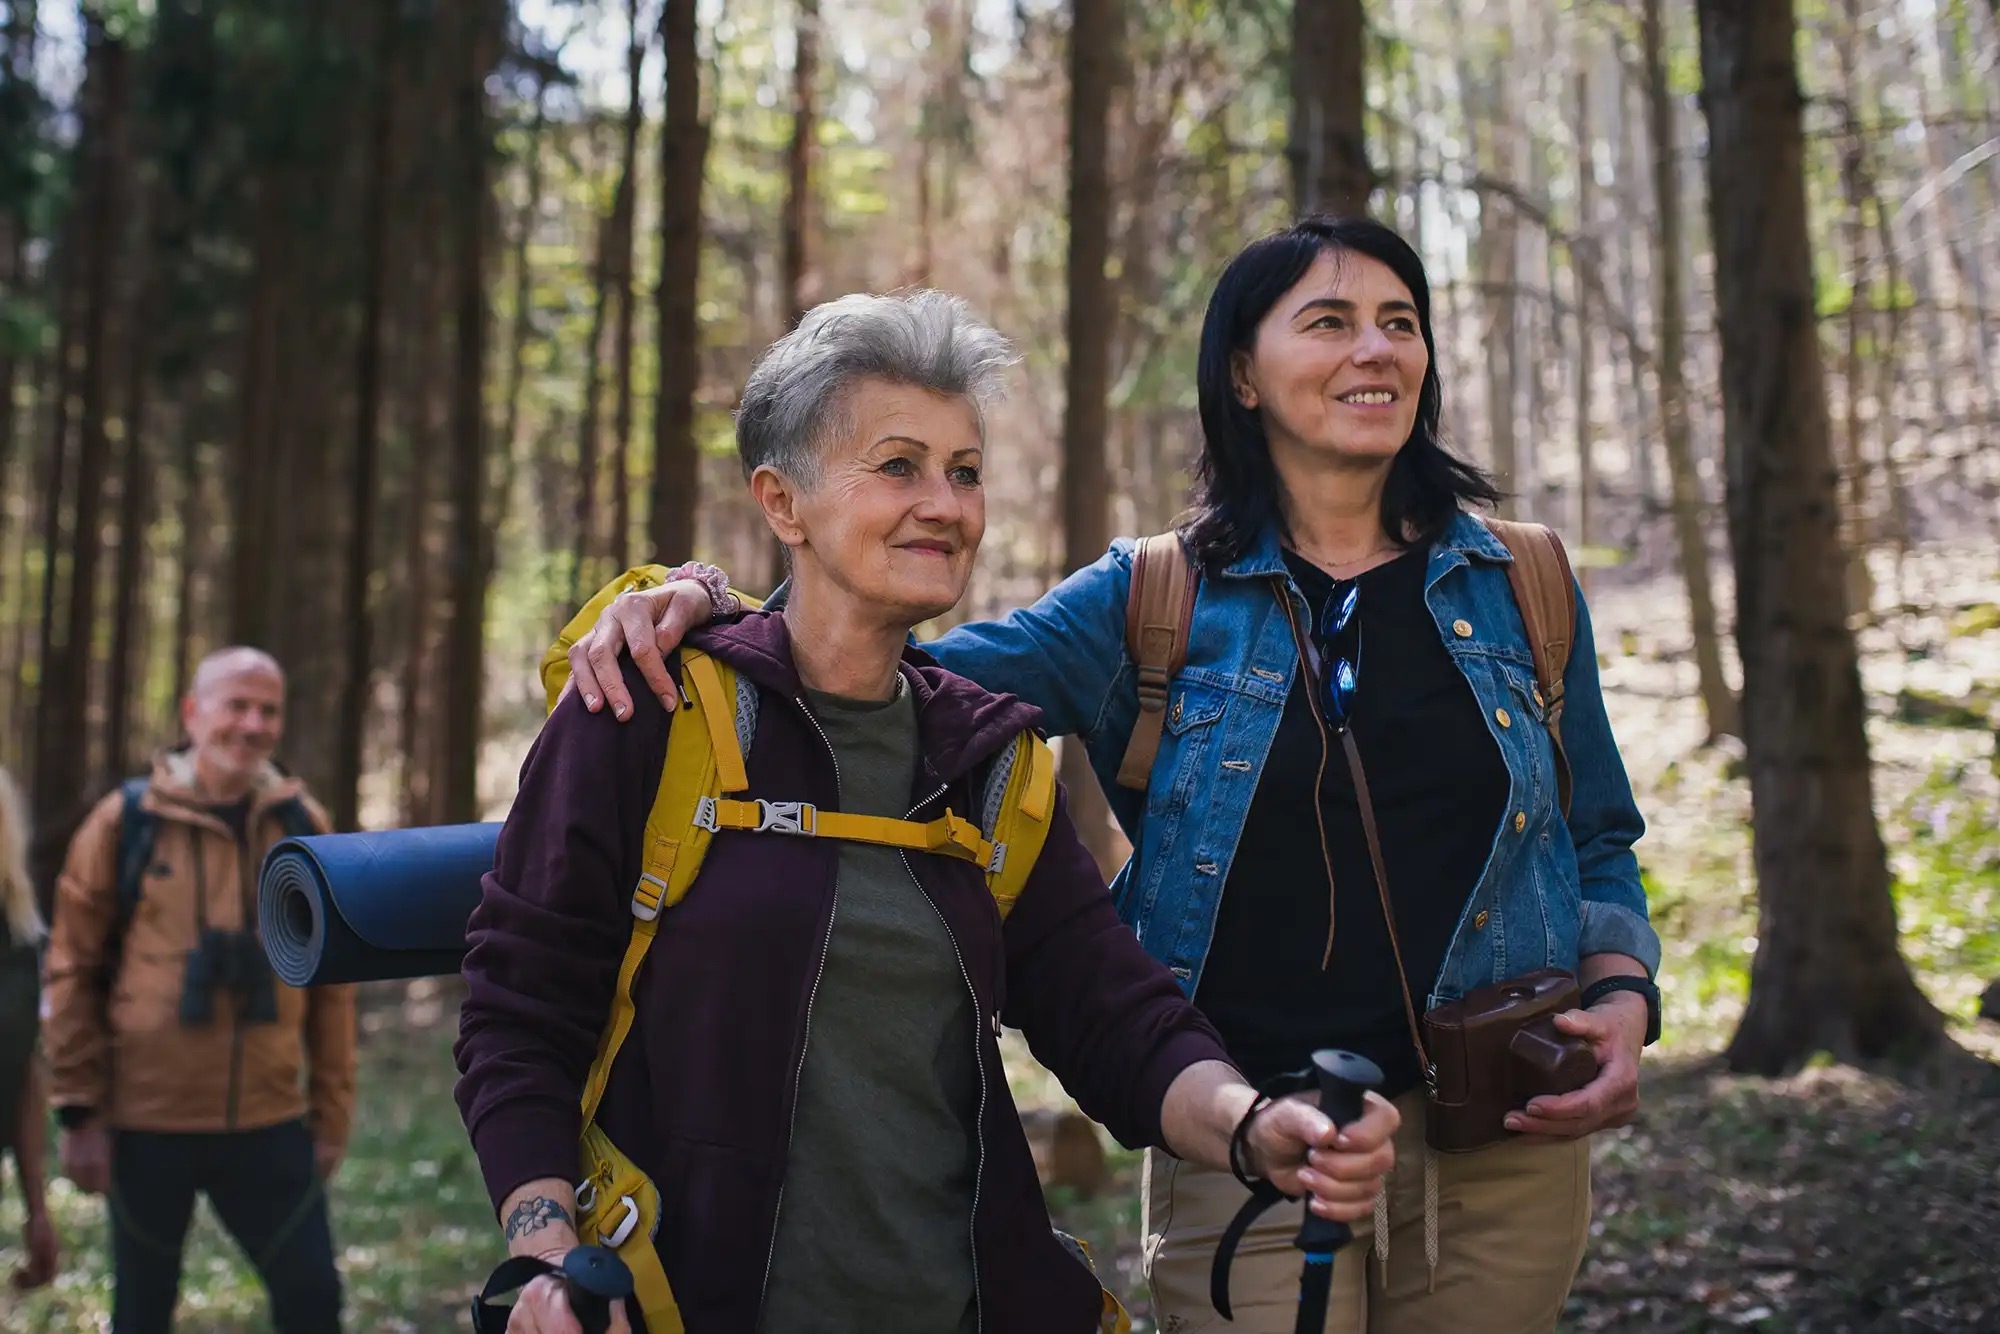 A senior mother and her middle-aged daughter hiking through a forest with a small group of friends.